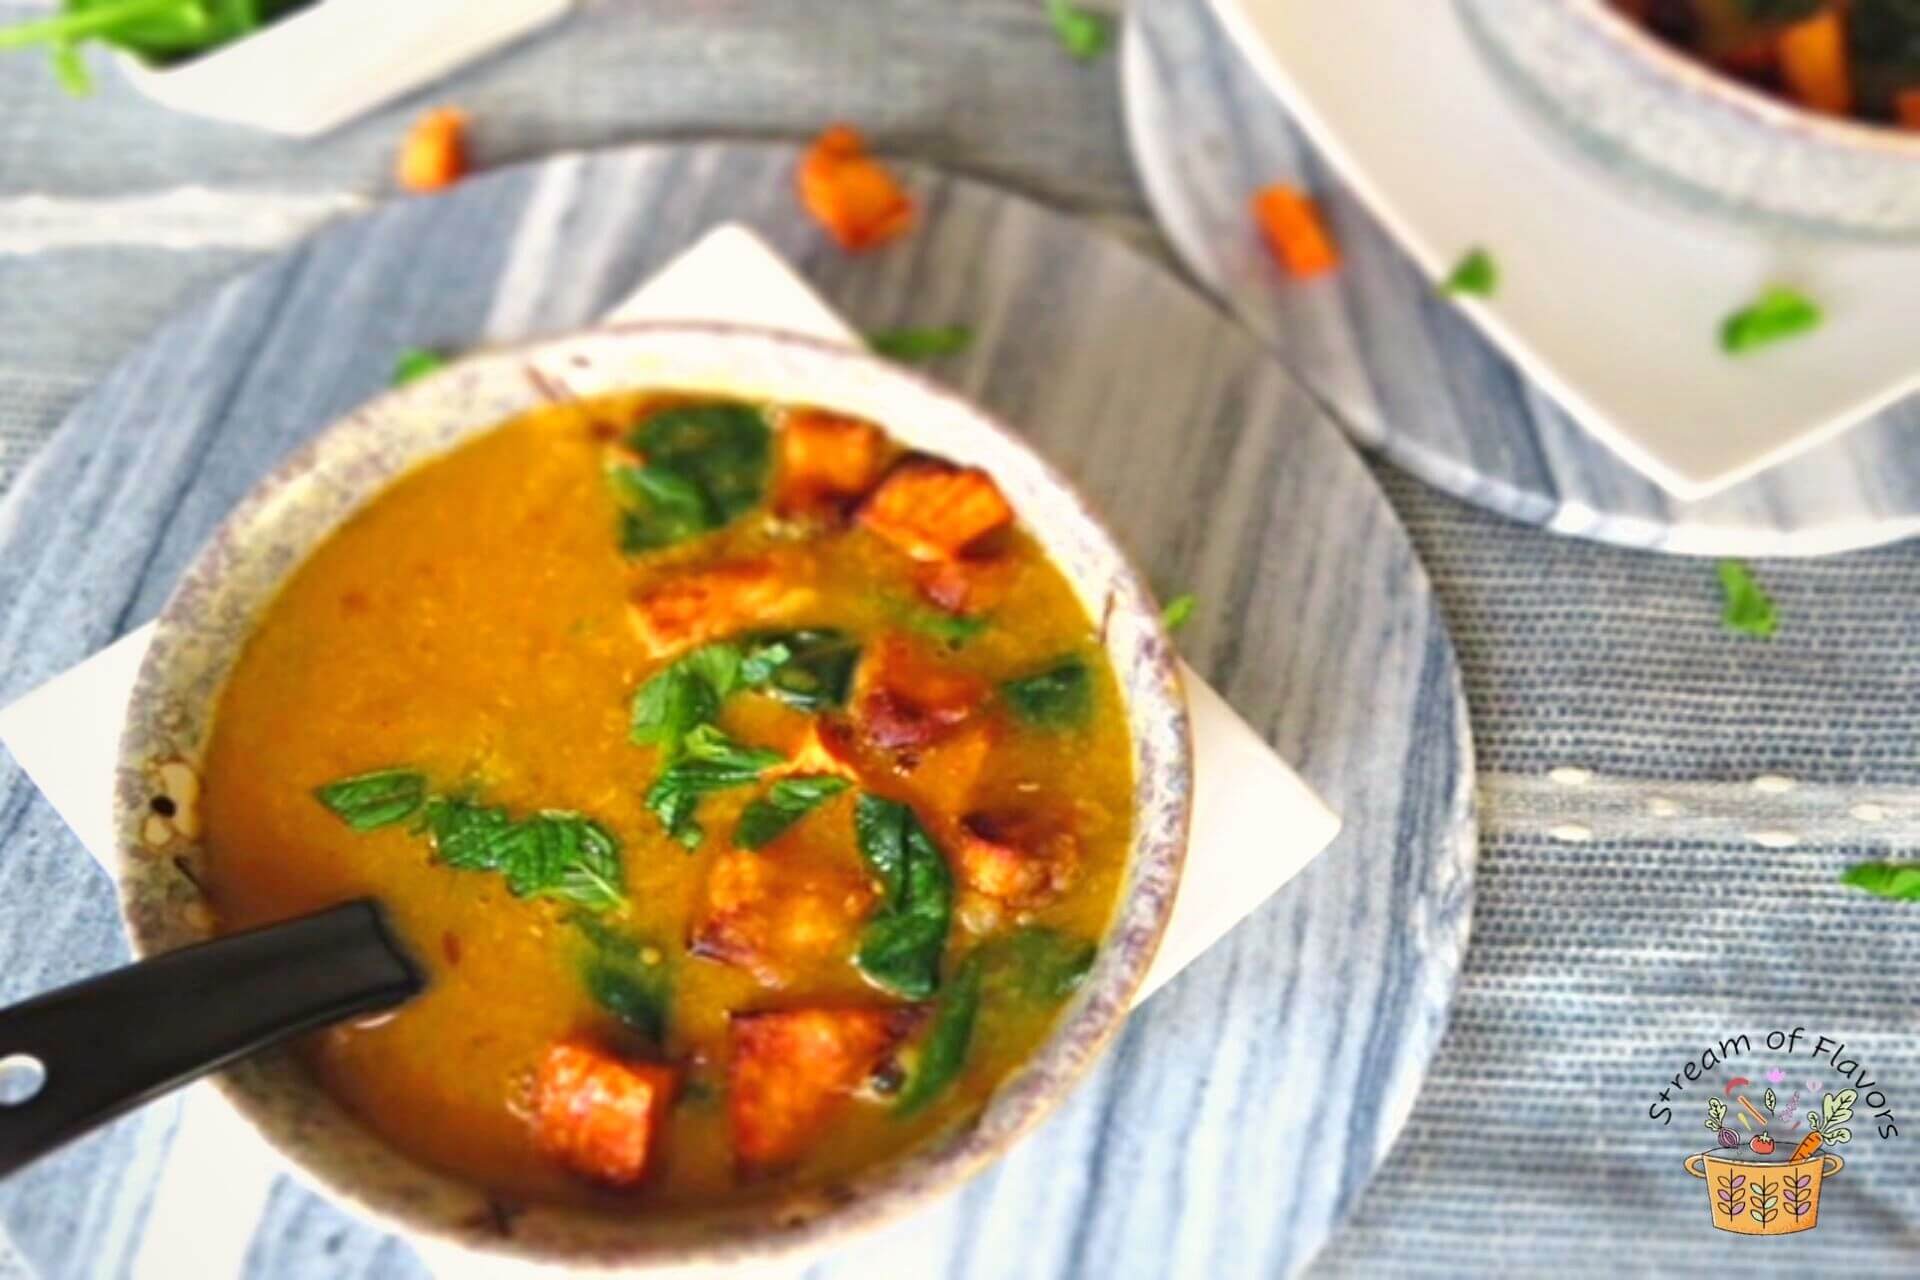 Moroccan red lentil soup with sweet potato